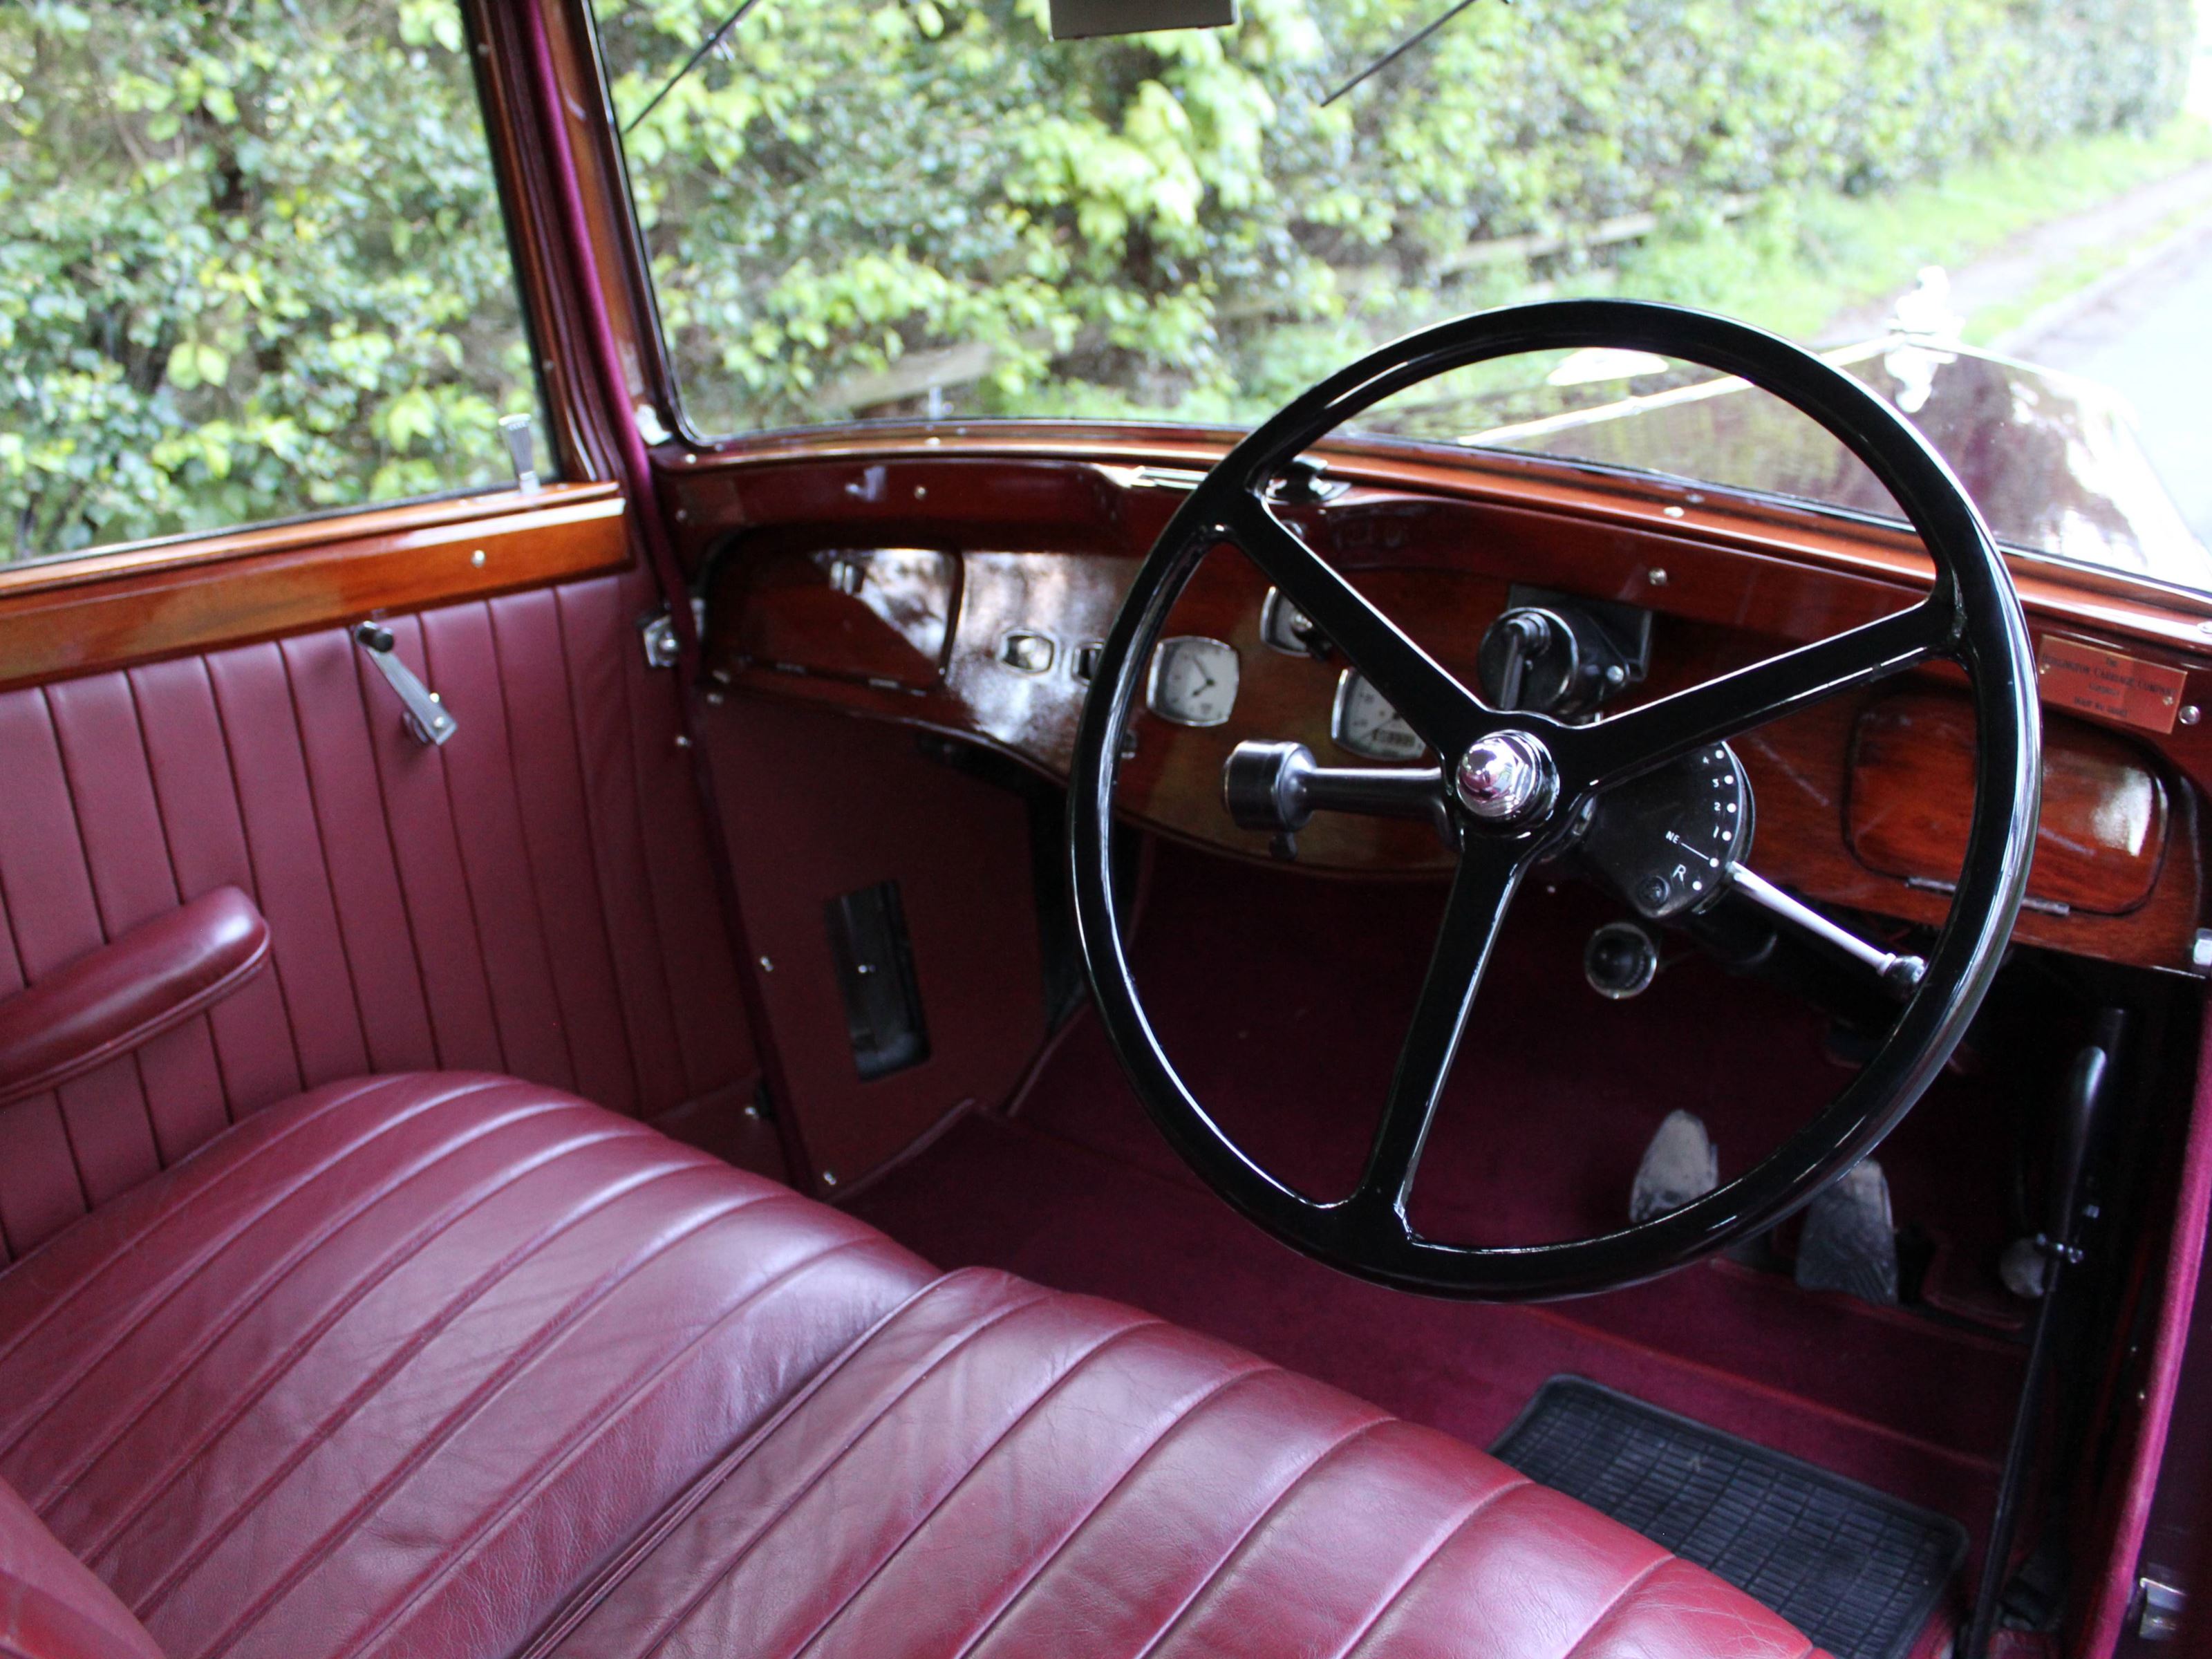 Classic Armstrong Siddeley Cars for Sale | CCFS